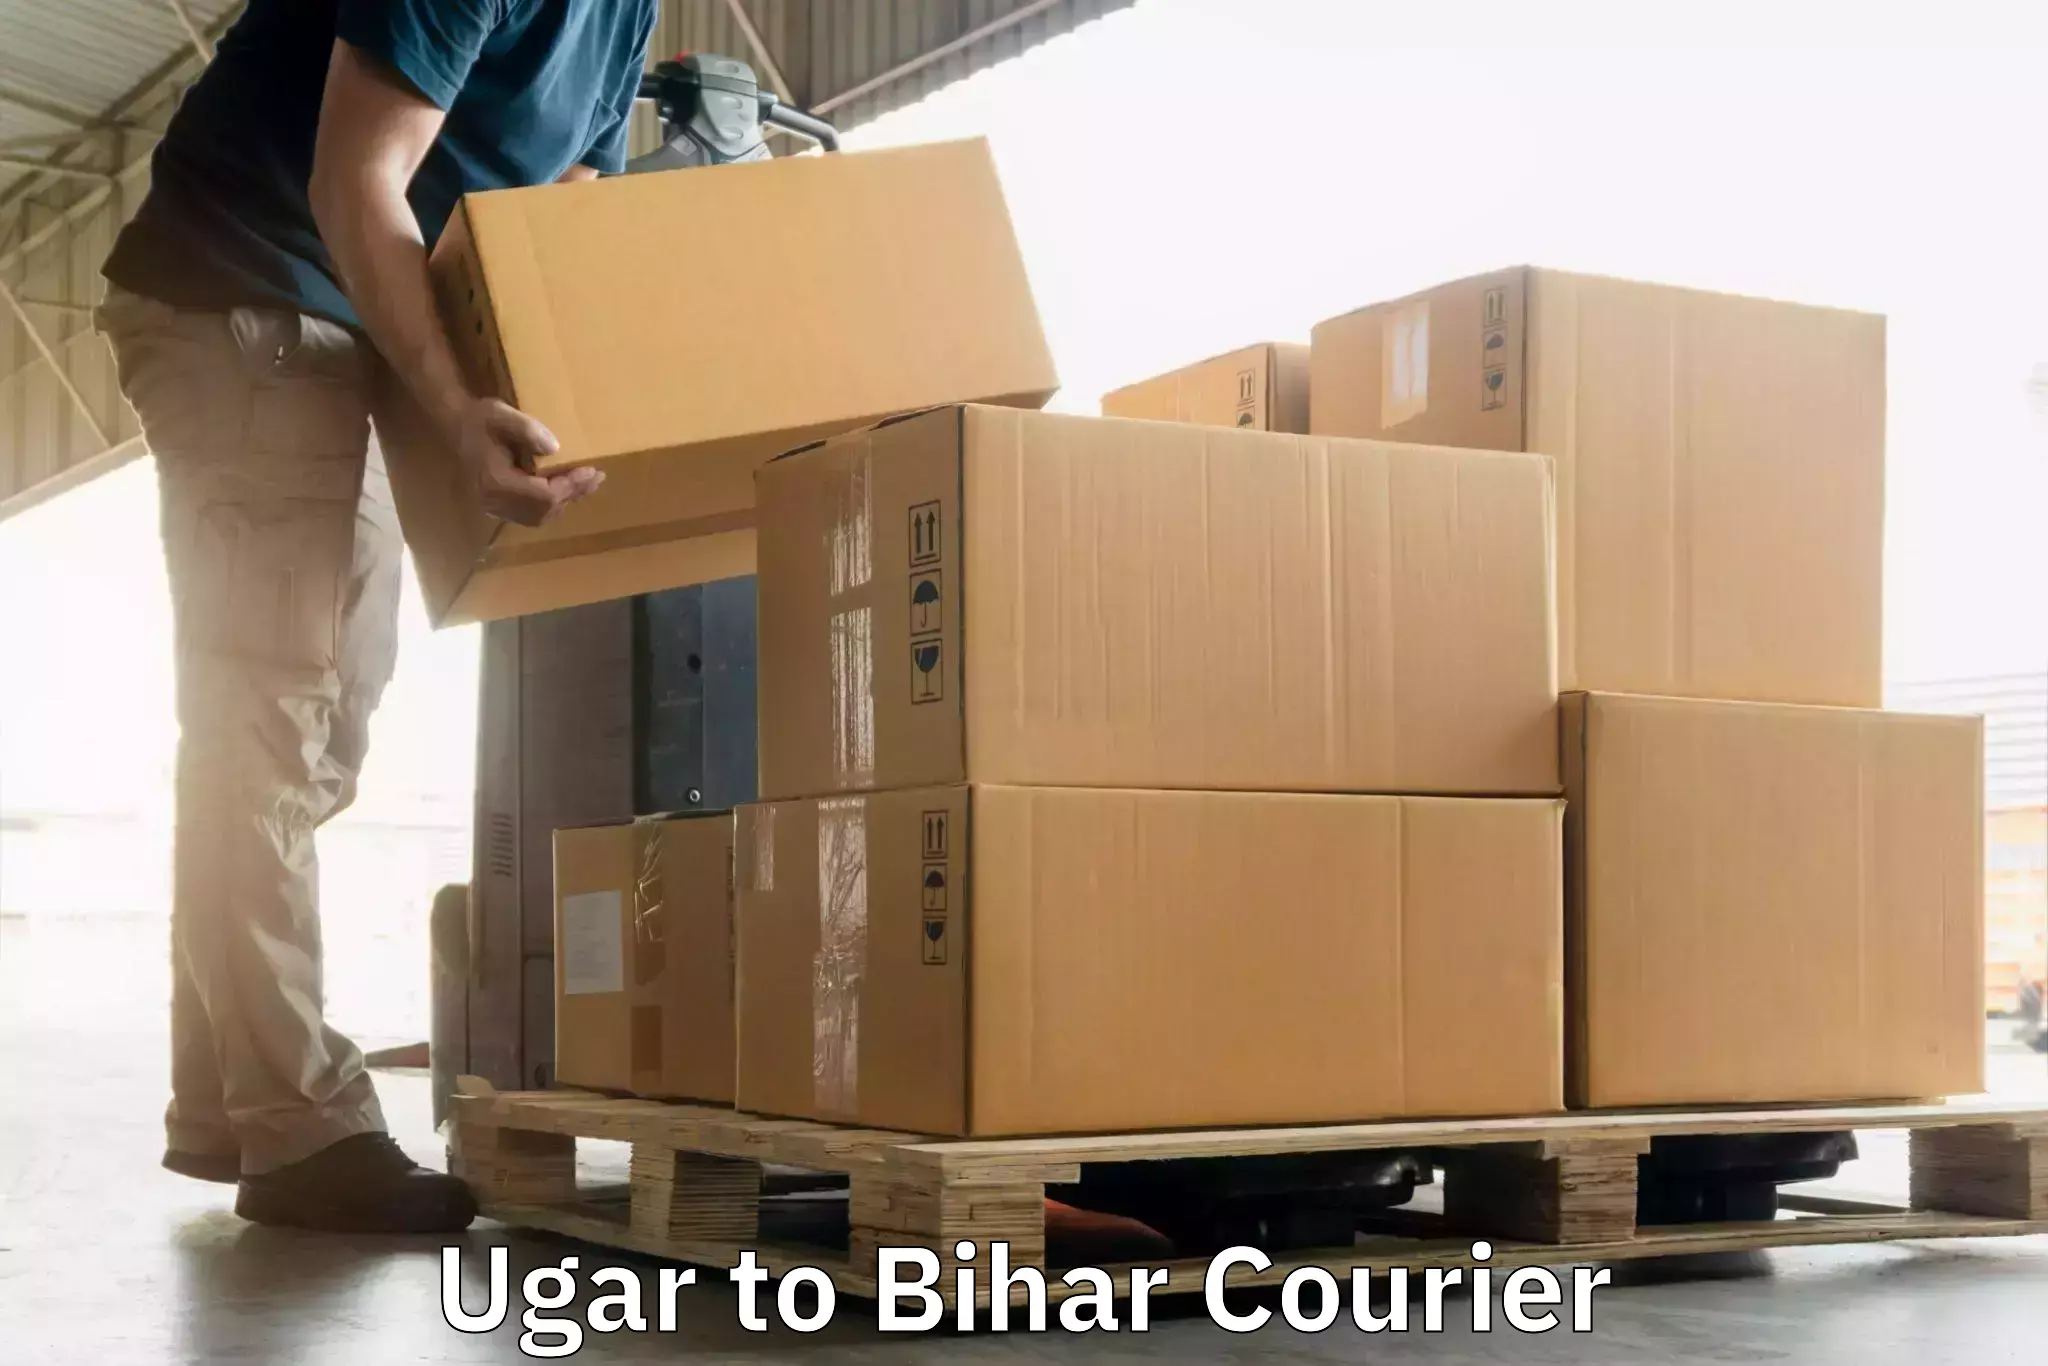 Full-service courier options Ugar to Manjhaul